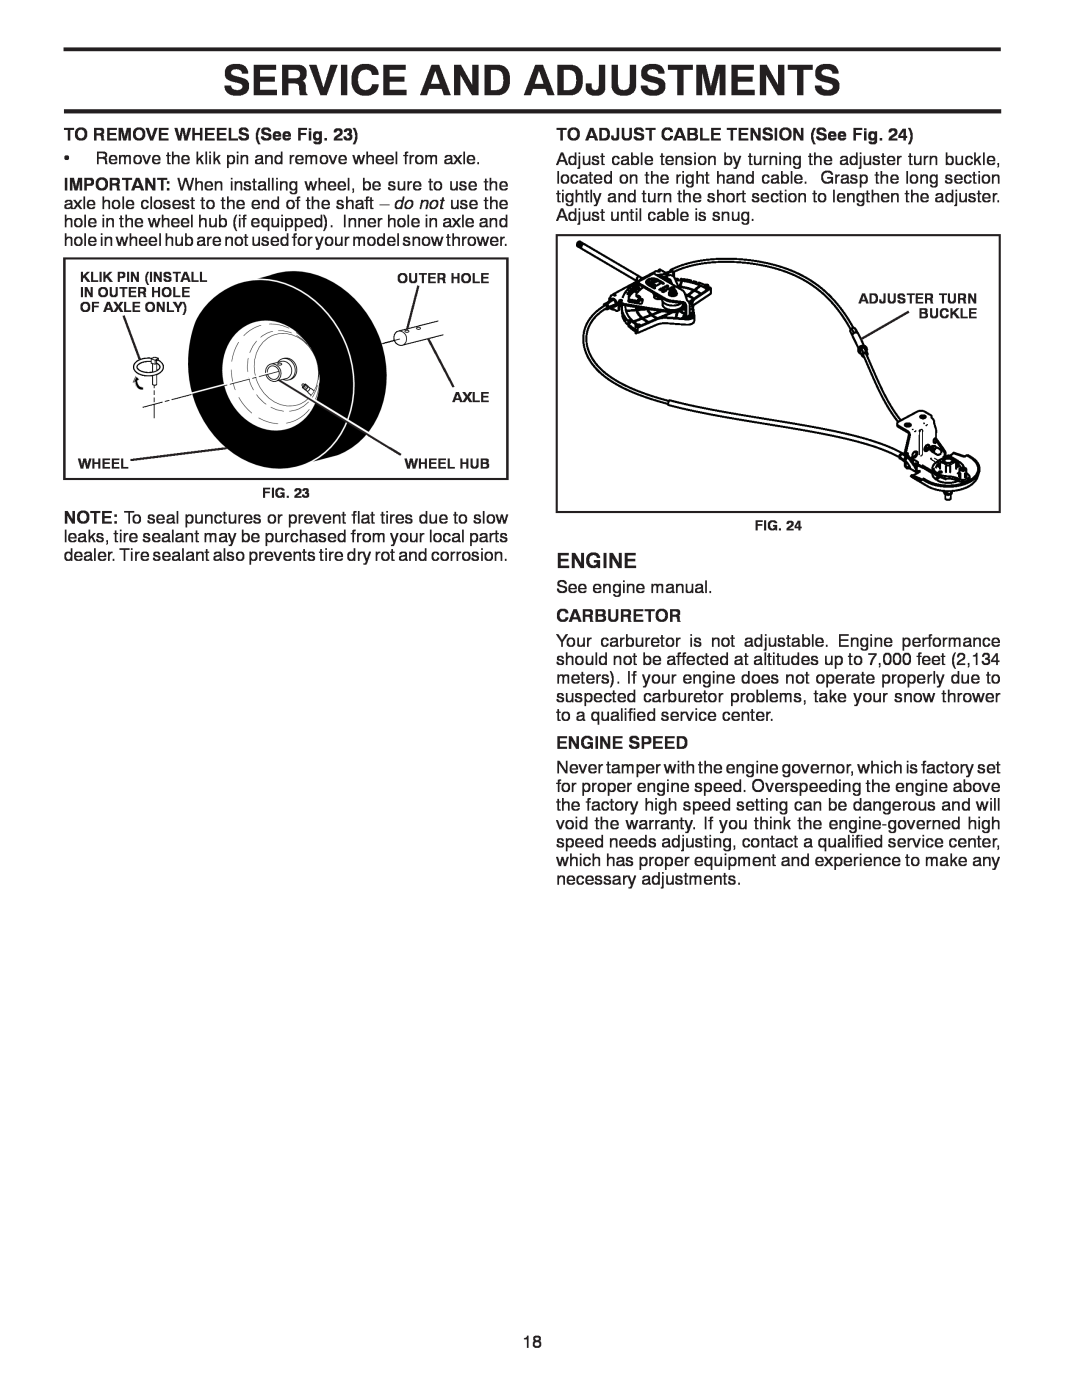 Poulan PP1150E30 Service And Adjustments, Engine, TO REMOVE WHEELS See Fig, TO ADJUST CABLE TENSION See Fig, Carburetor 